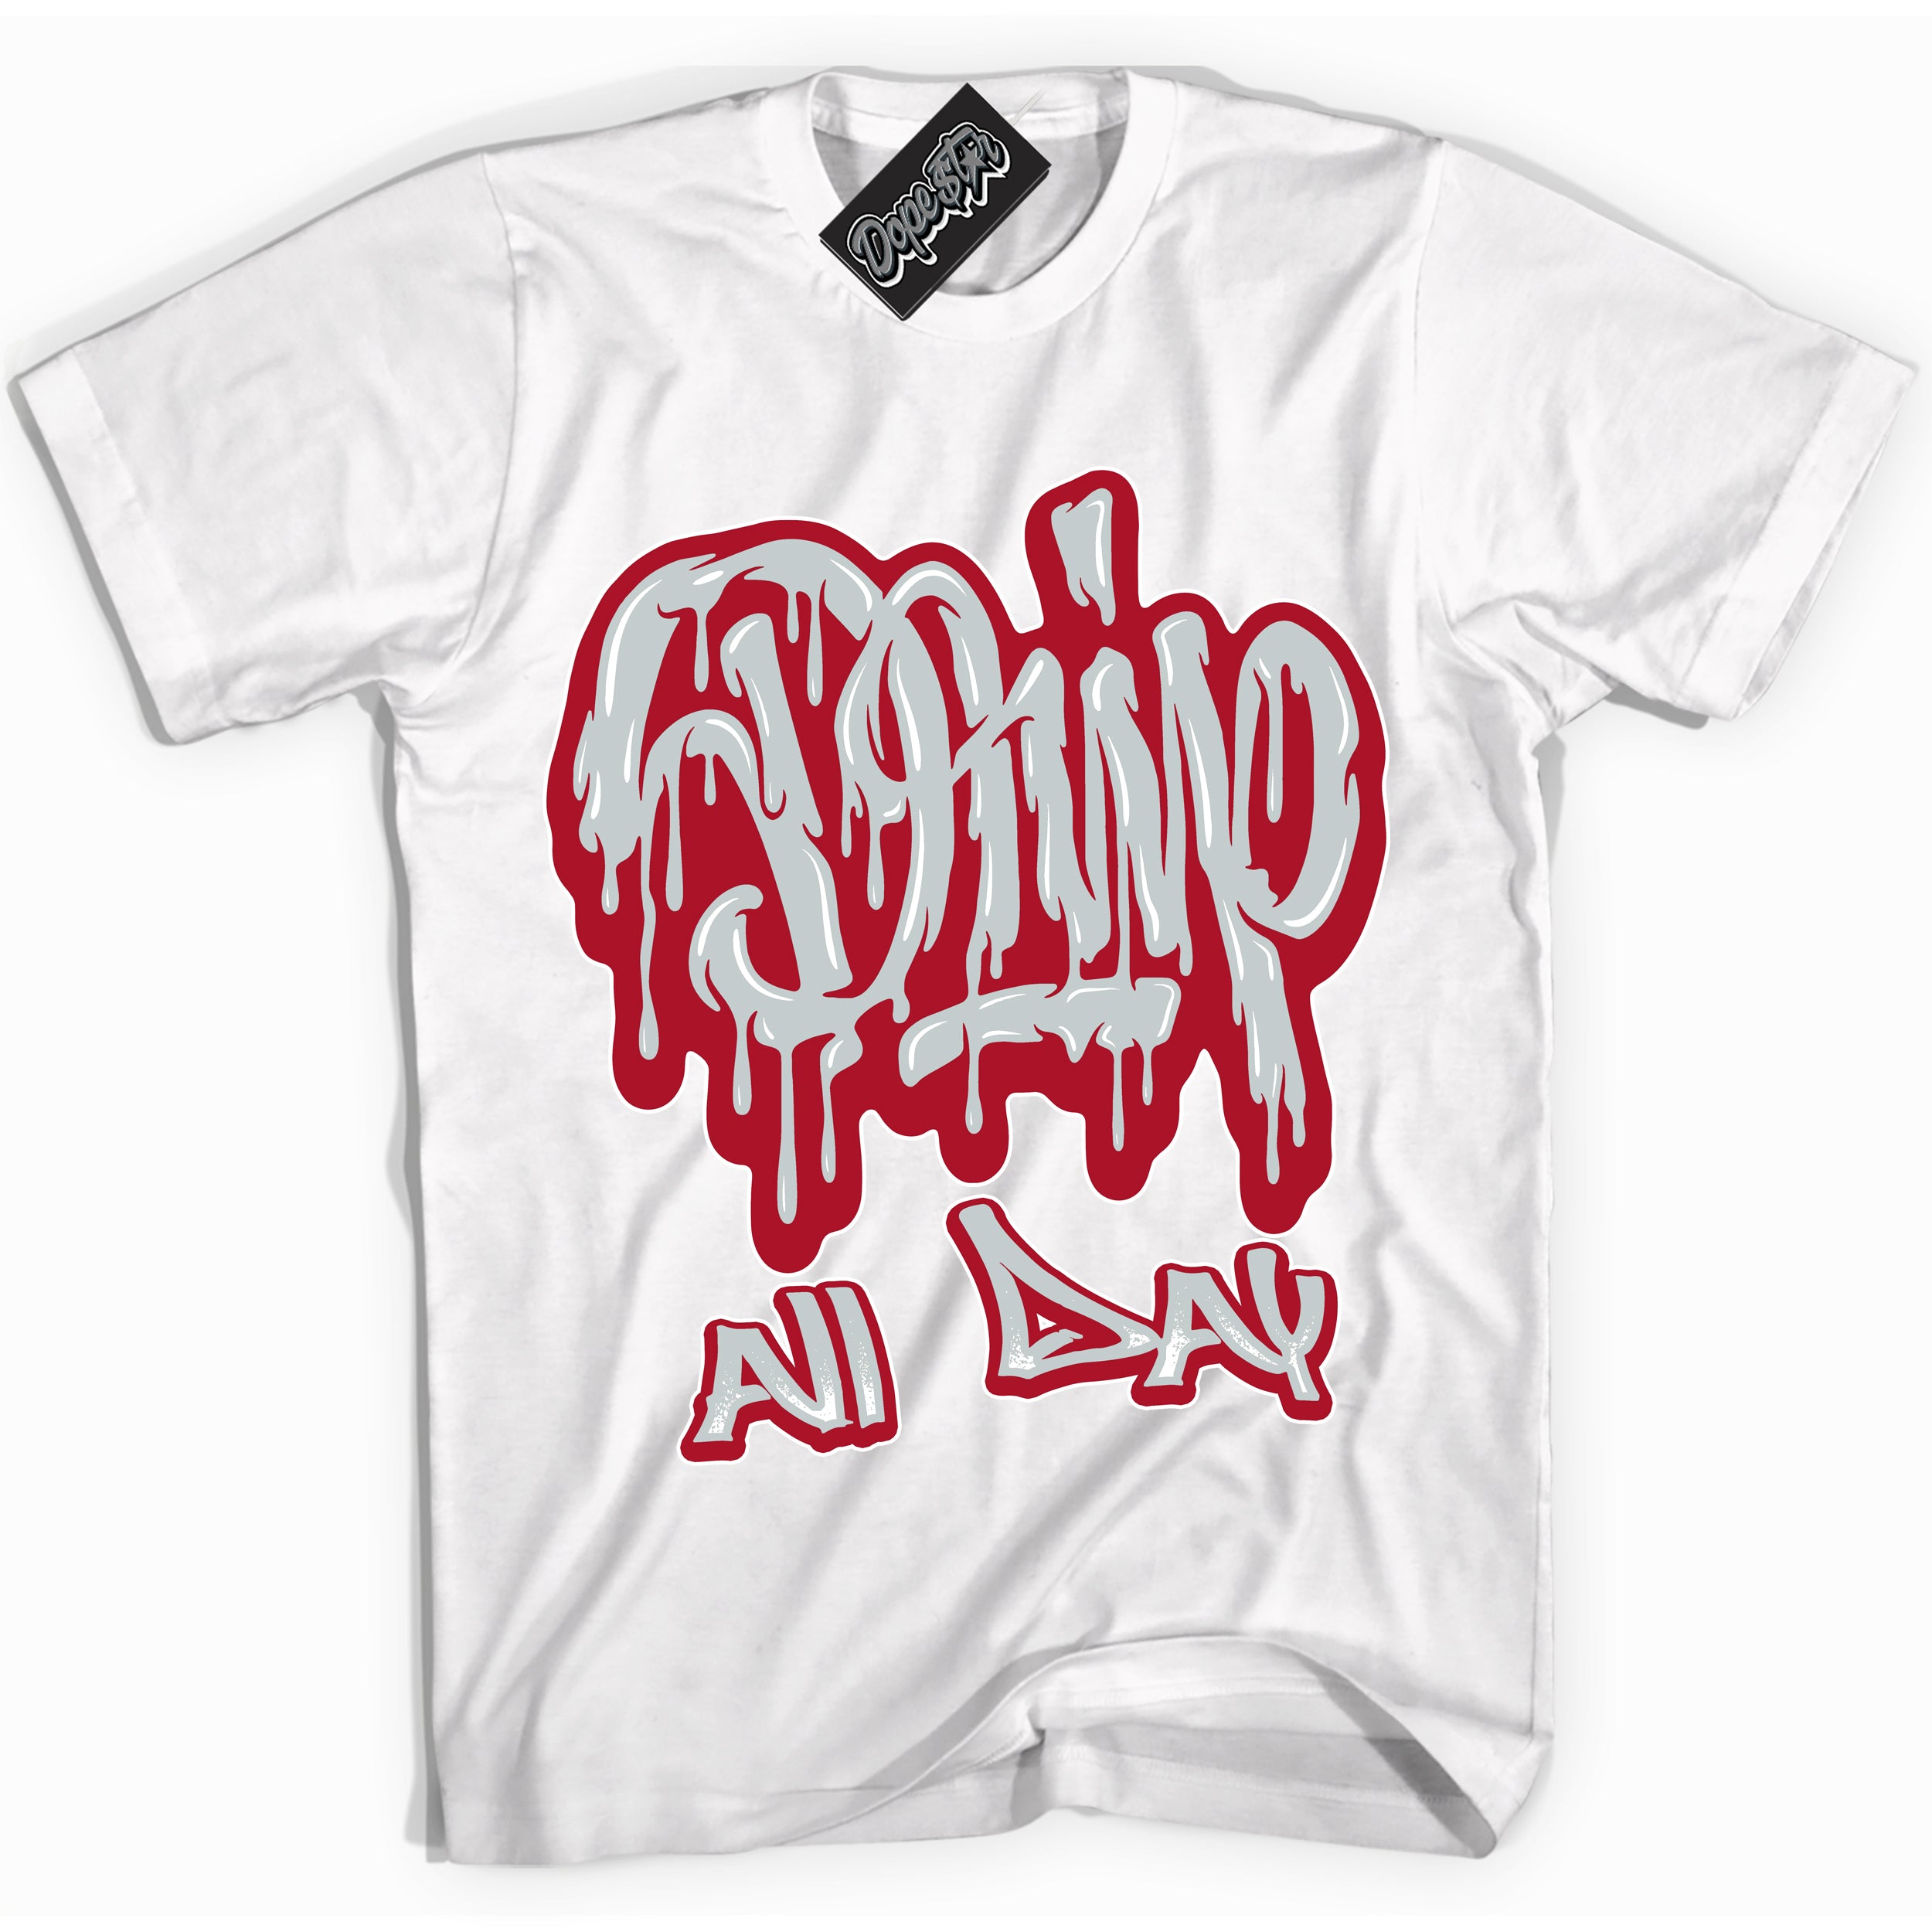 Cool White Shirt with “ Drip All Day” design that perfectly matches Reverse Ultraman Sneakers.